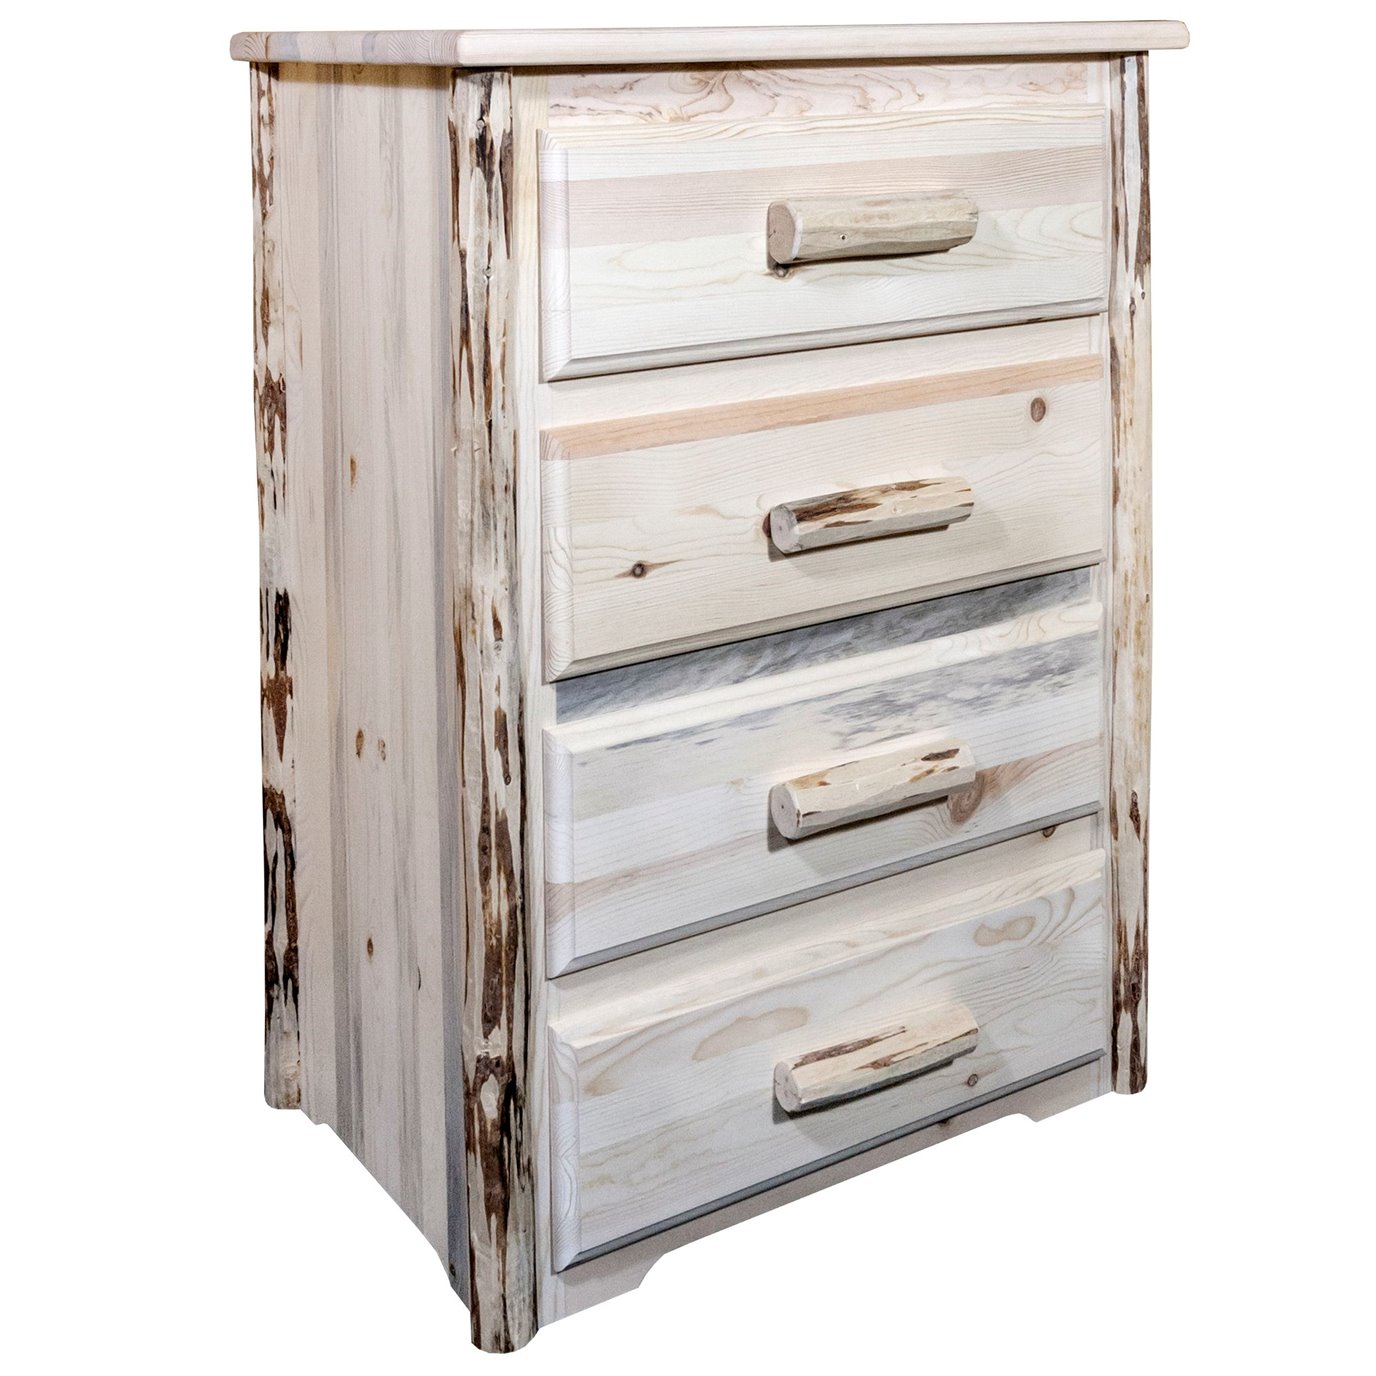 Montana 4 Drawer Chest of Drawers - Clear Lacquer Finish